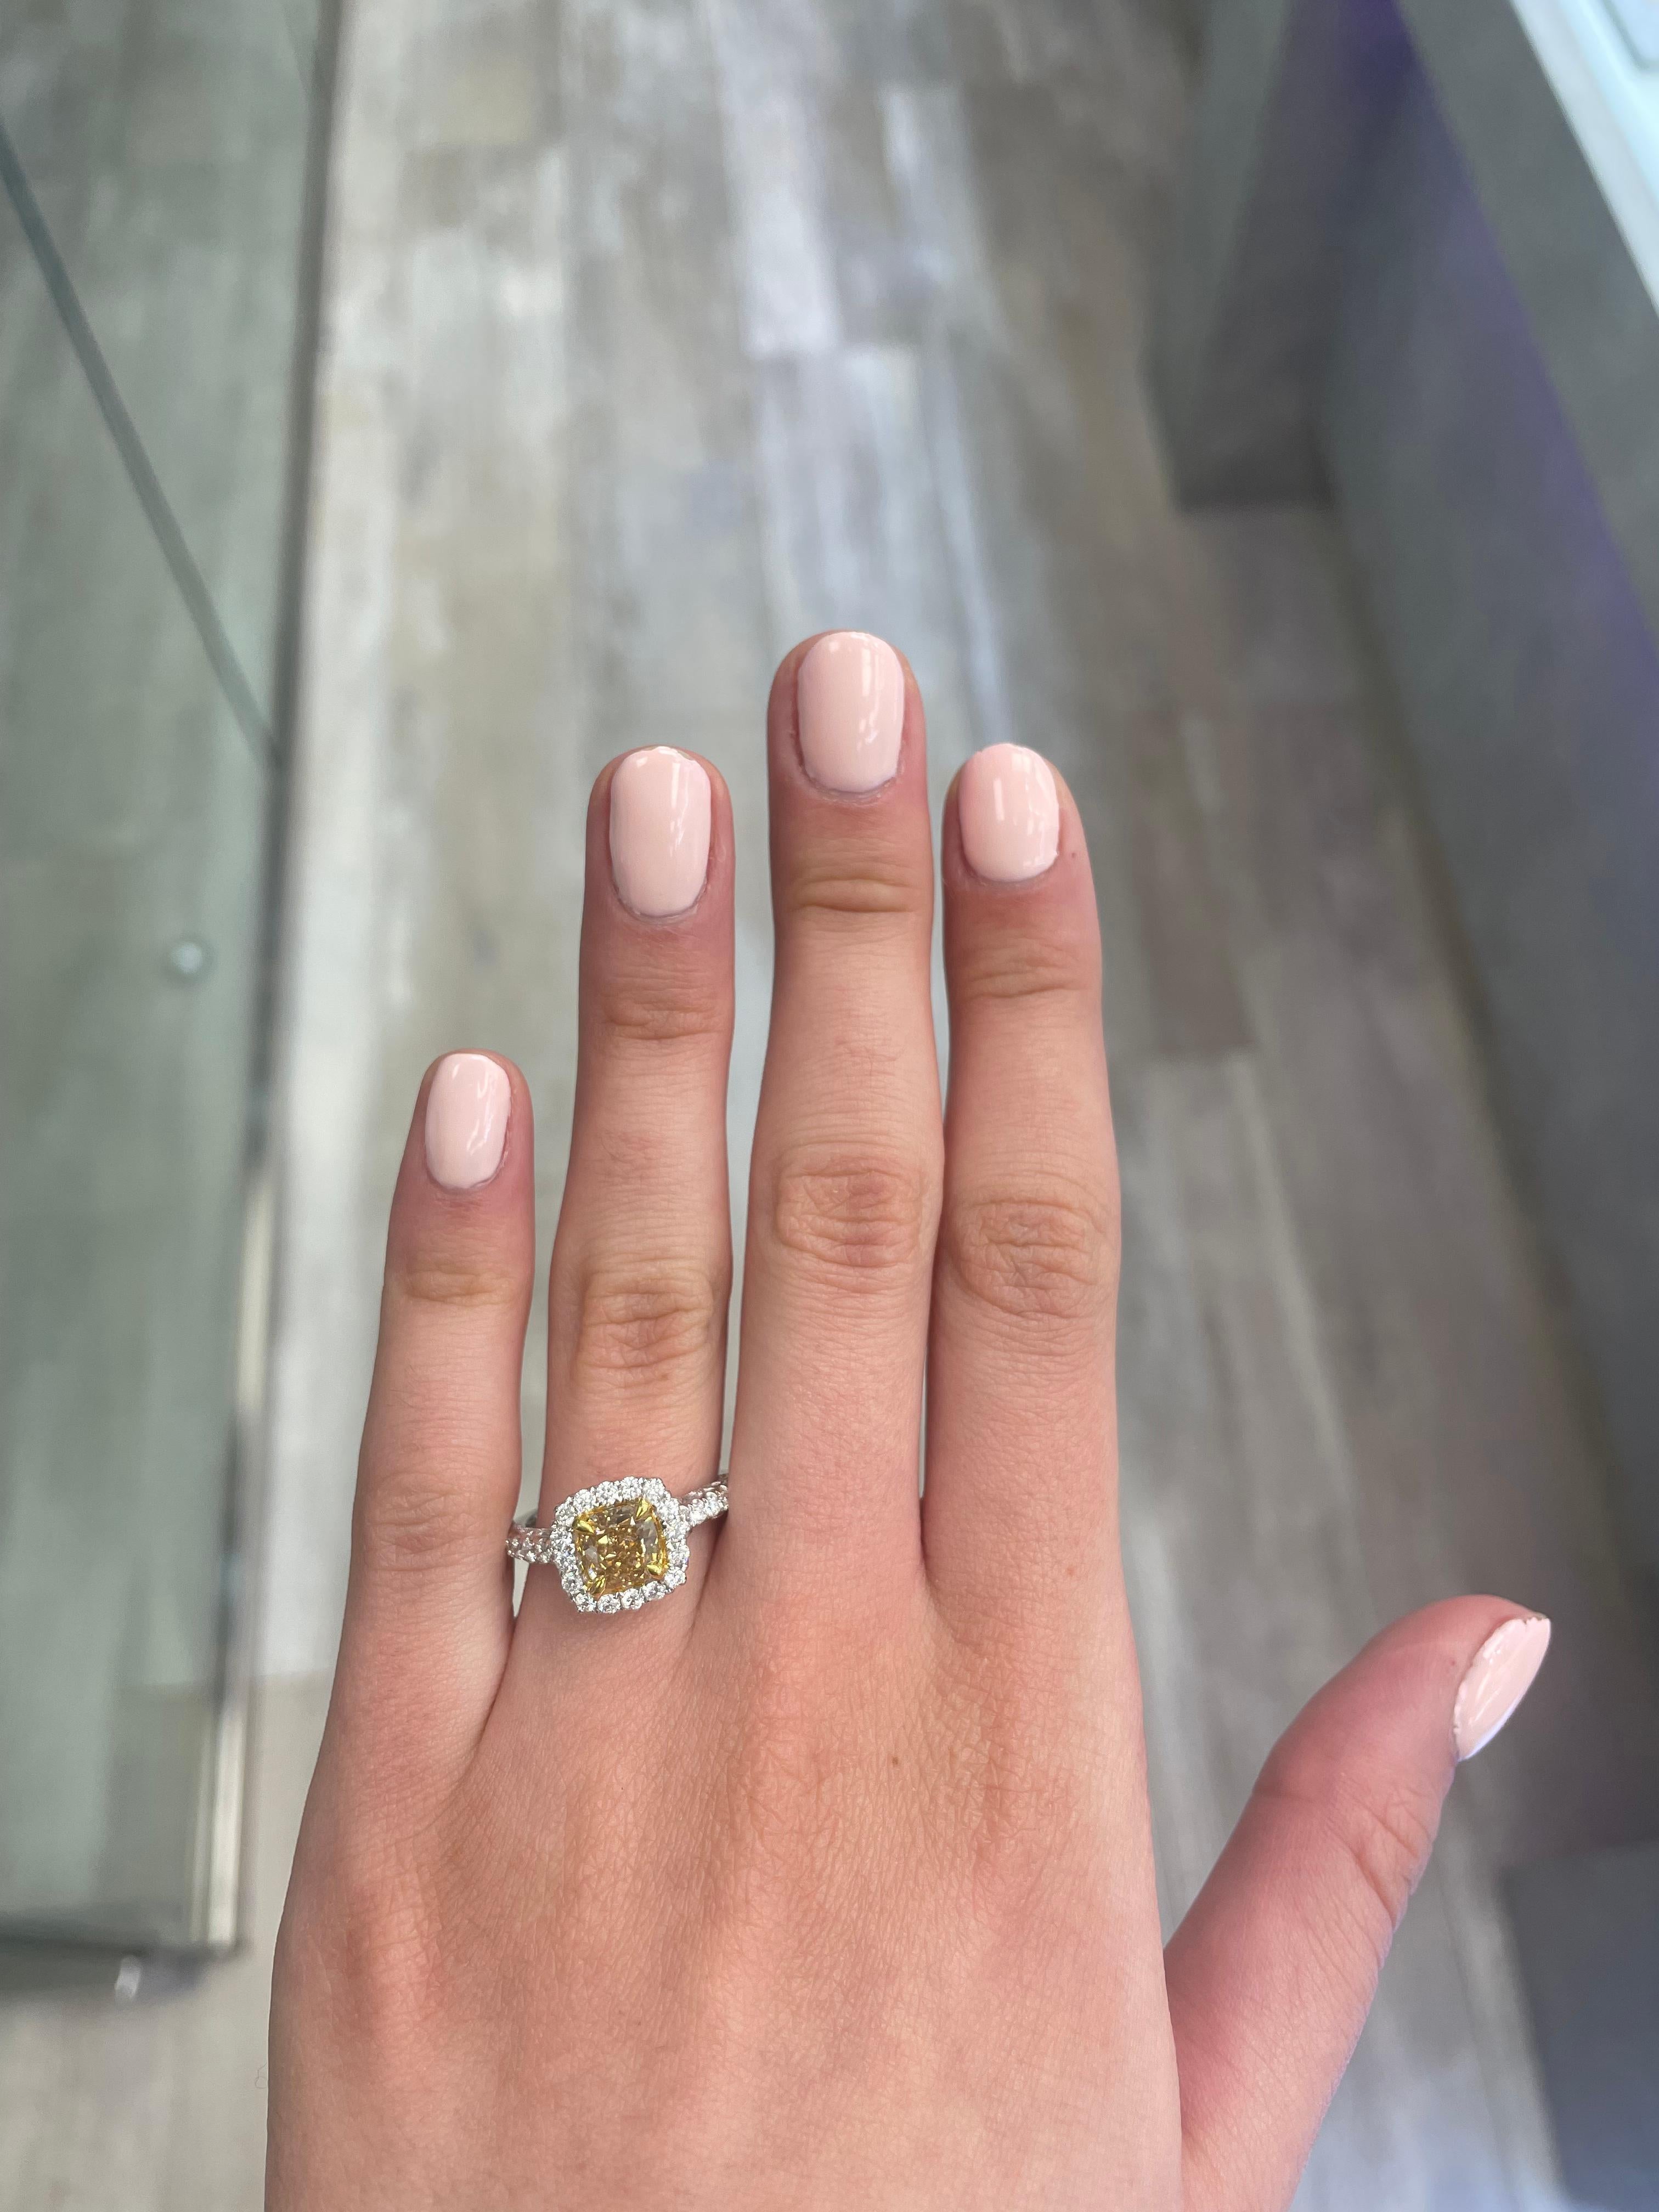 Stunning modern EGL certified yellow diamond with halo ring, two-tone 18k yellow and white gold, split shank. By Alexander Beverly Hills
1.78 carats total diamond weight.
1.15 carat cushion cut Fancy Yellowish Brown color and VVS2 clarity diamond,